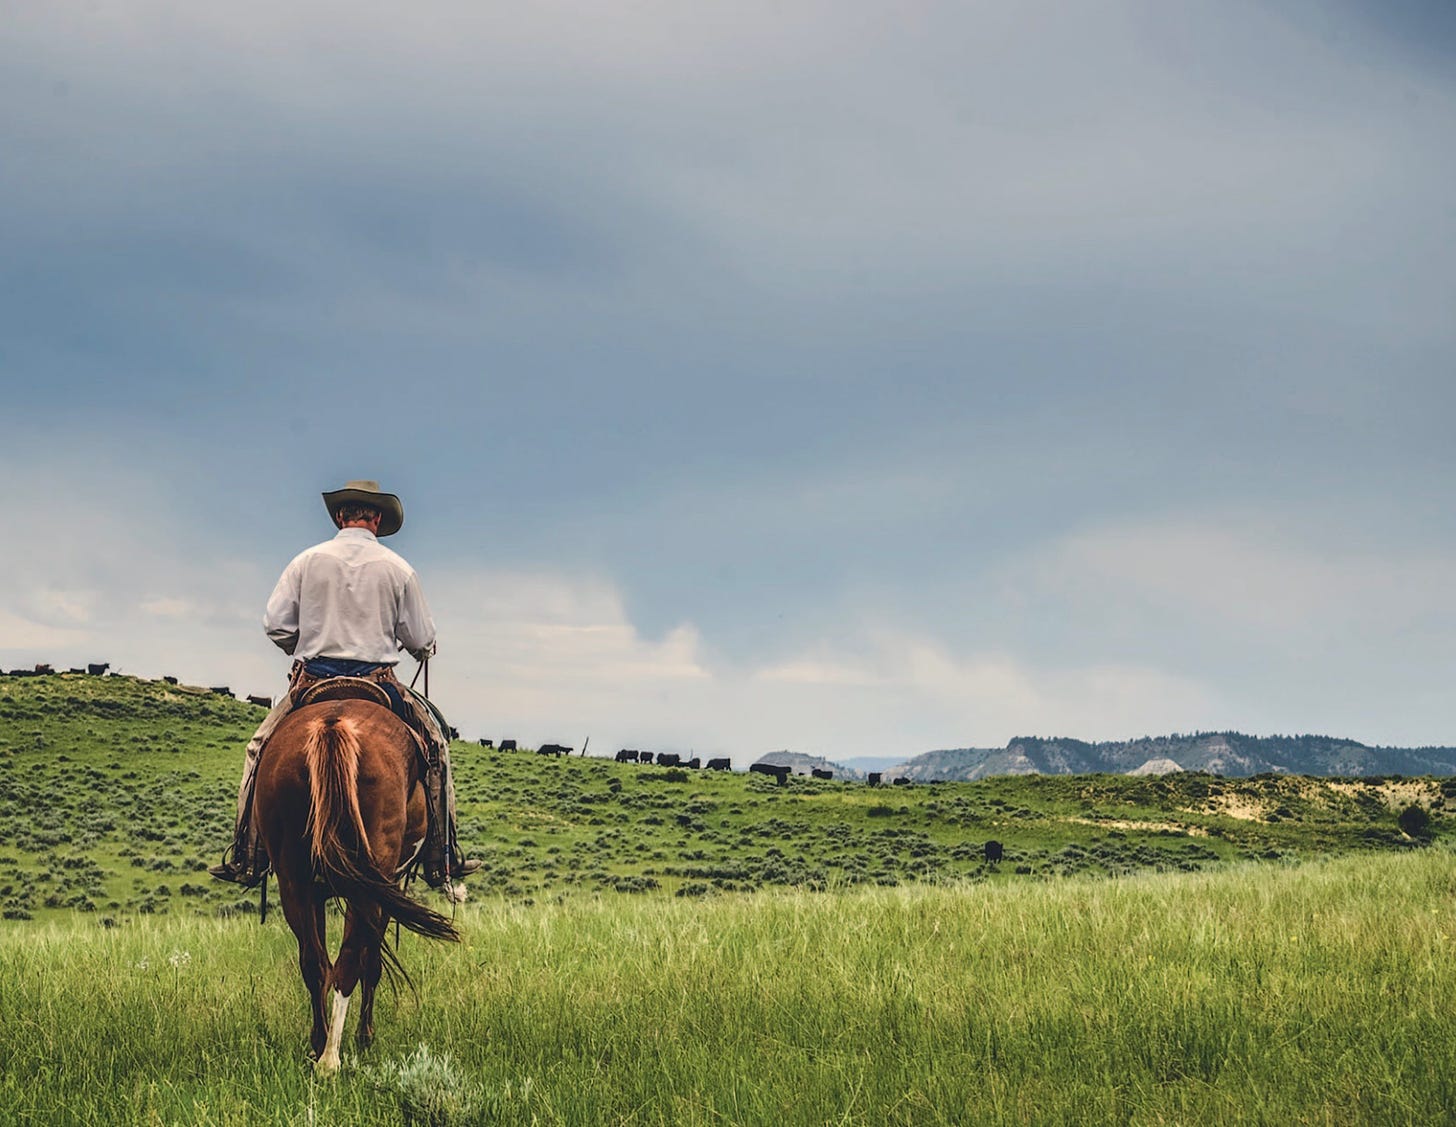 cowboy on horse seen from behind under cloudy sky and green grass